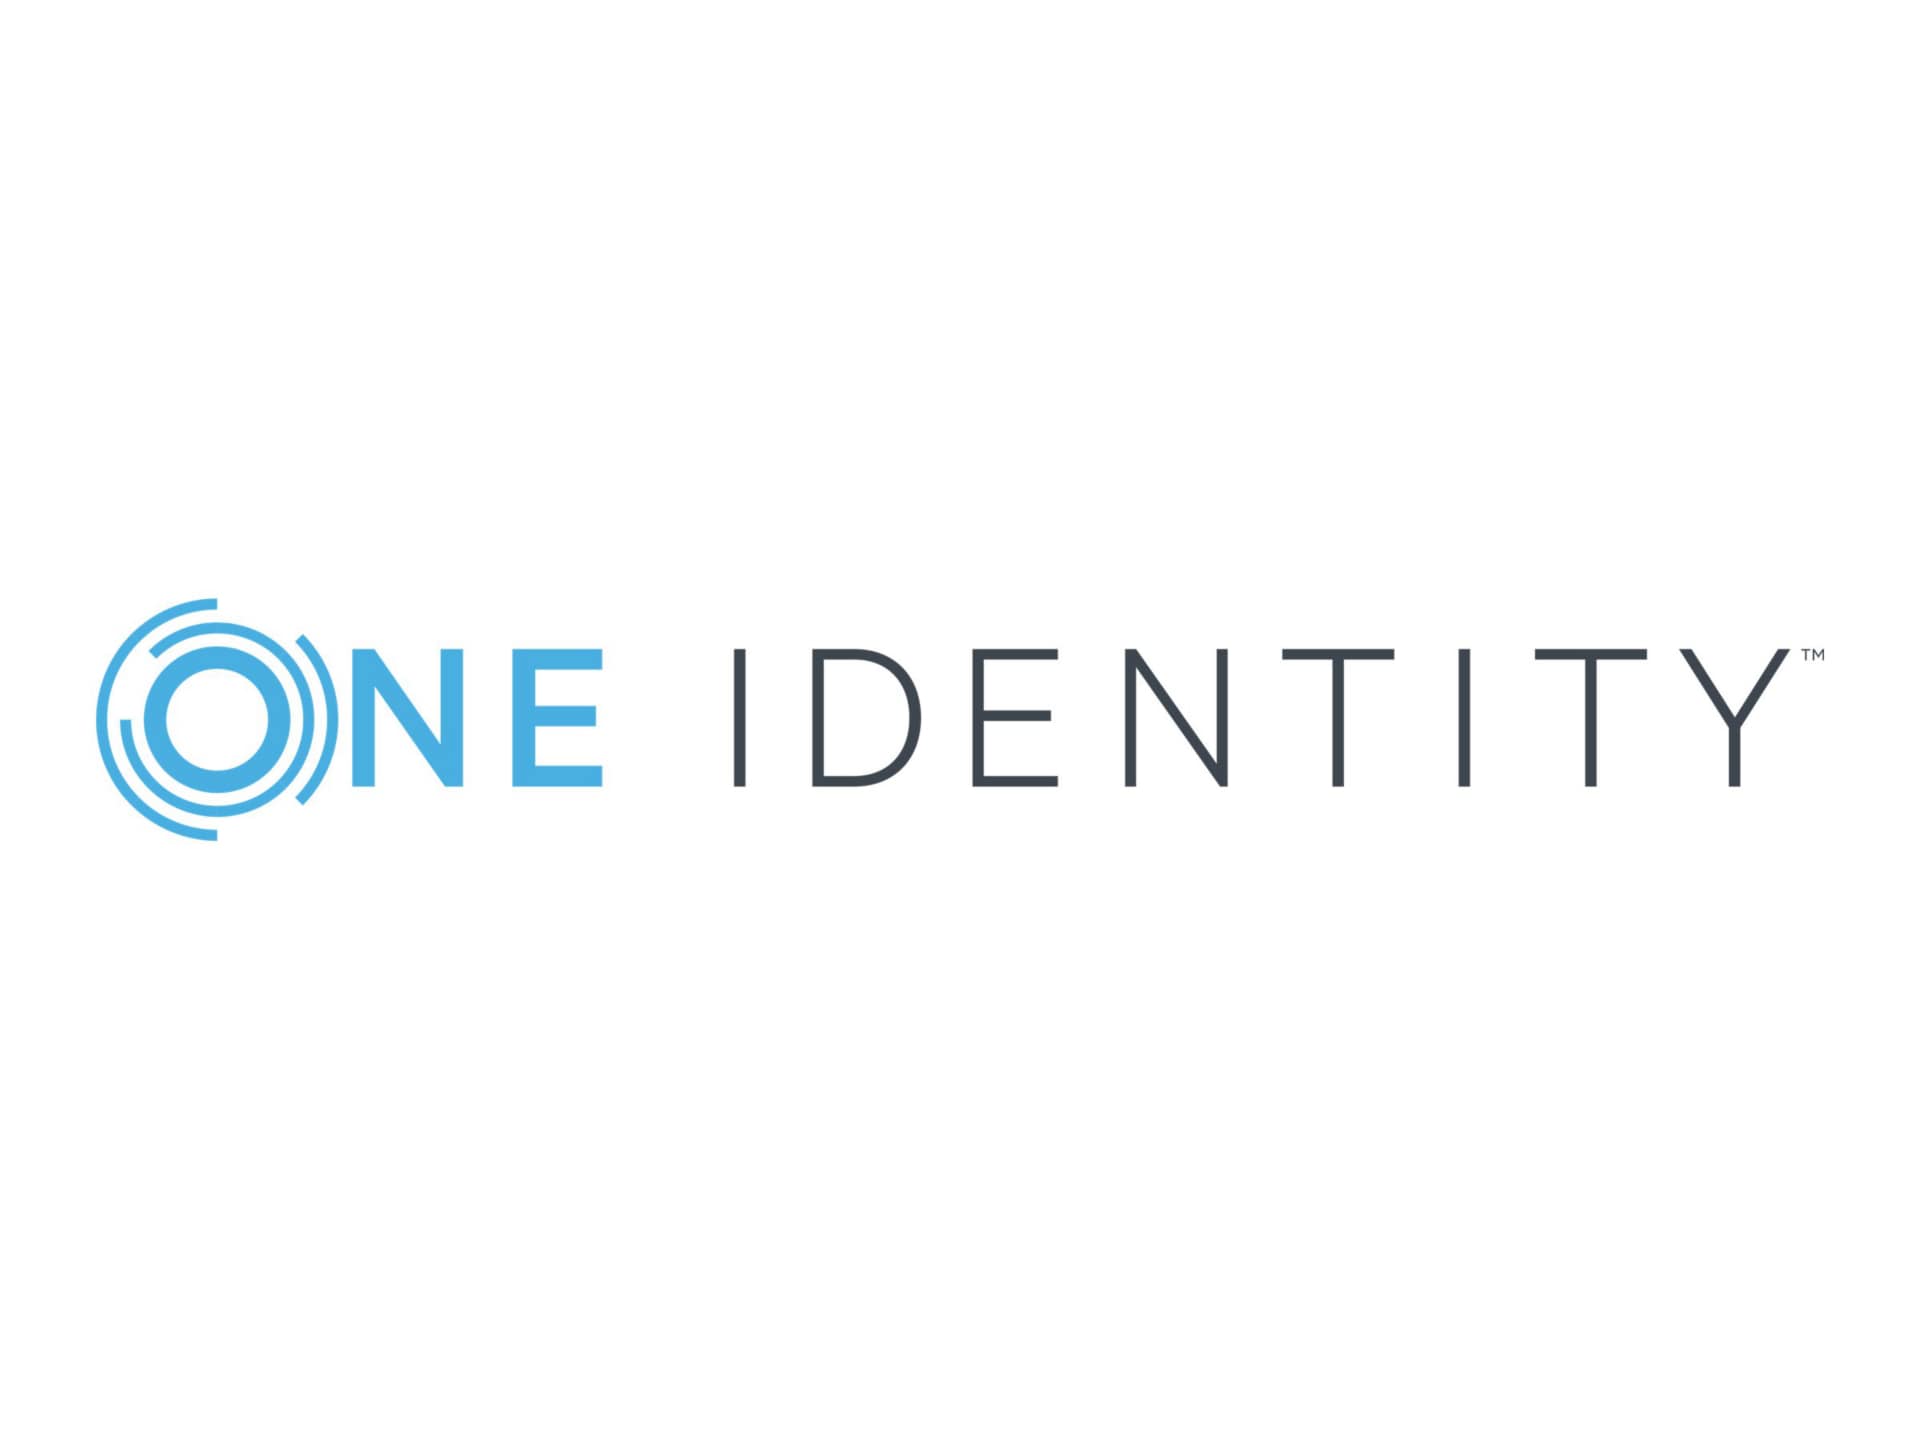 Quest One Identity Manager - license + 1 Year 24x7 Maintenance - 1 managed person